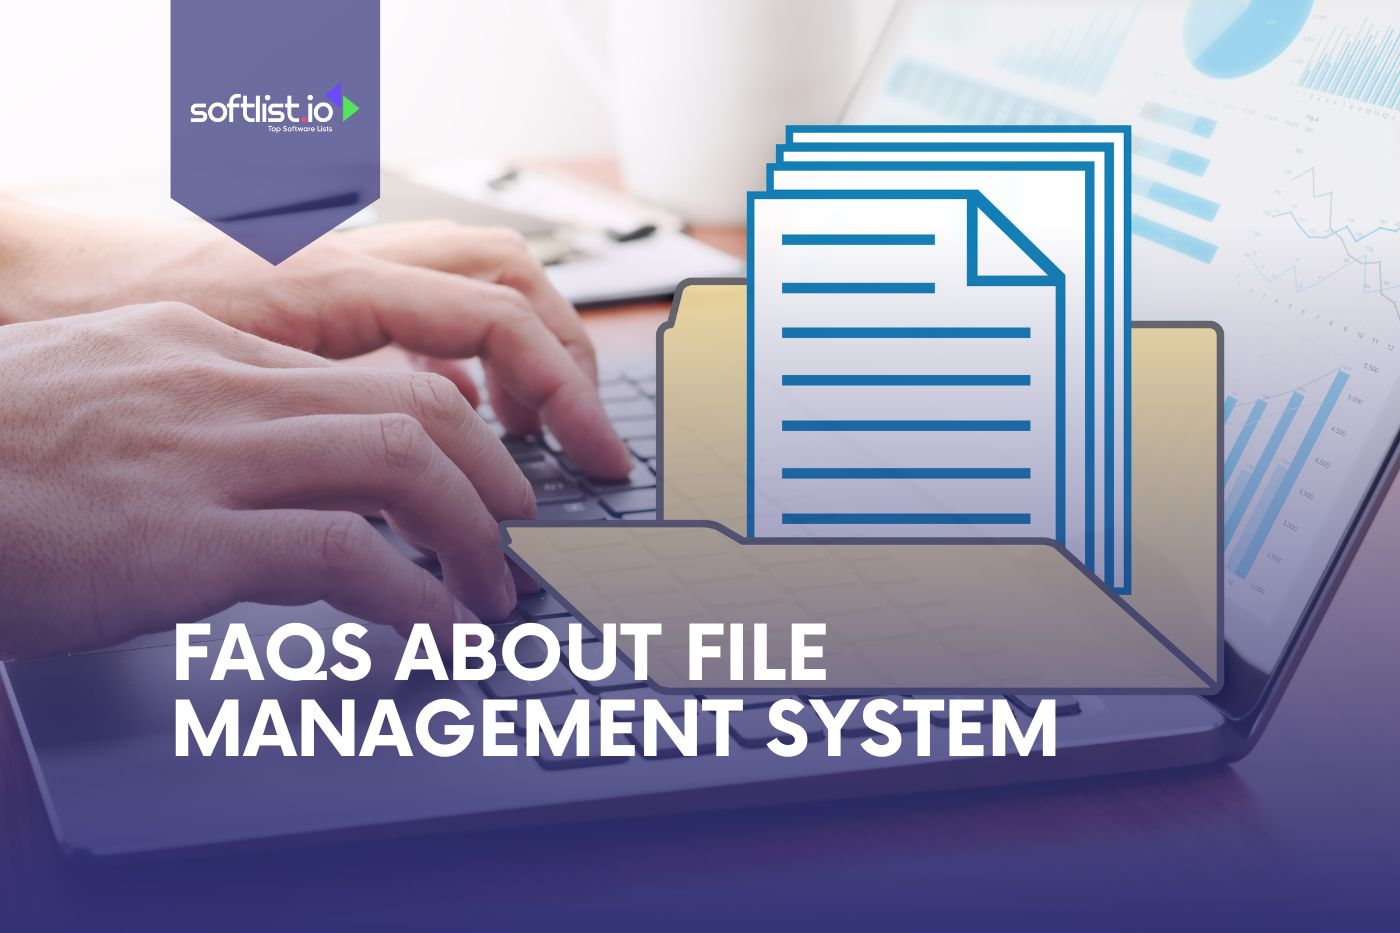 FAQs About File Management System